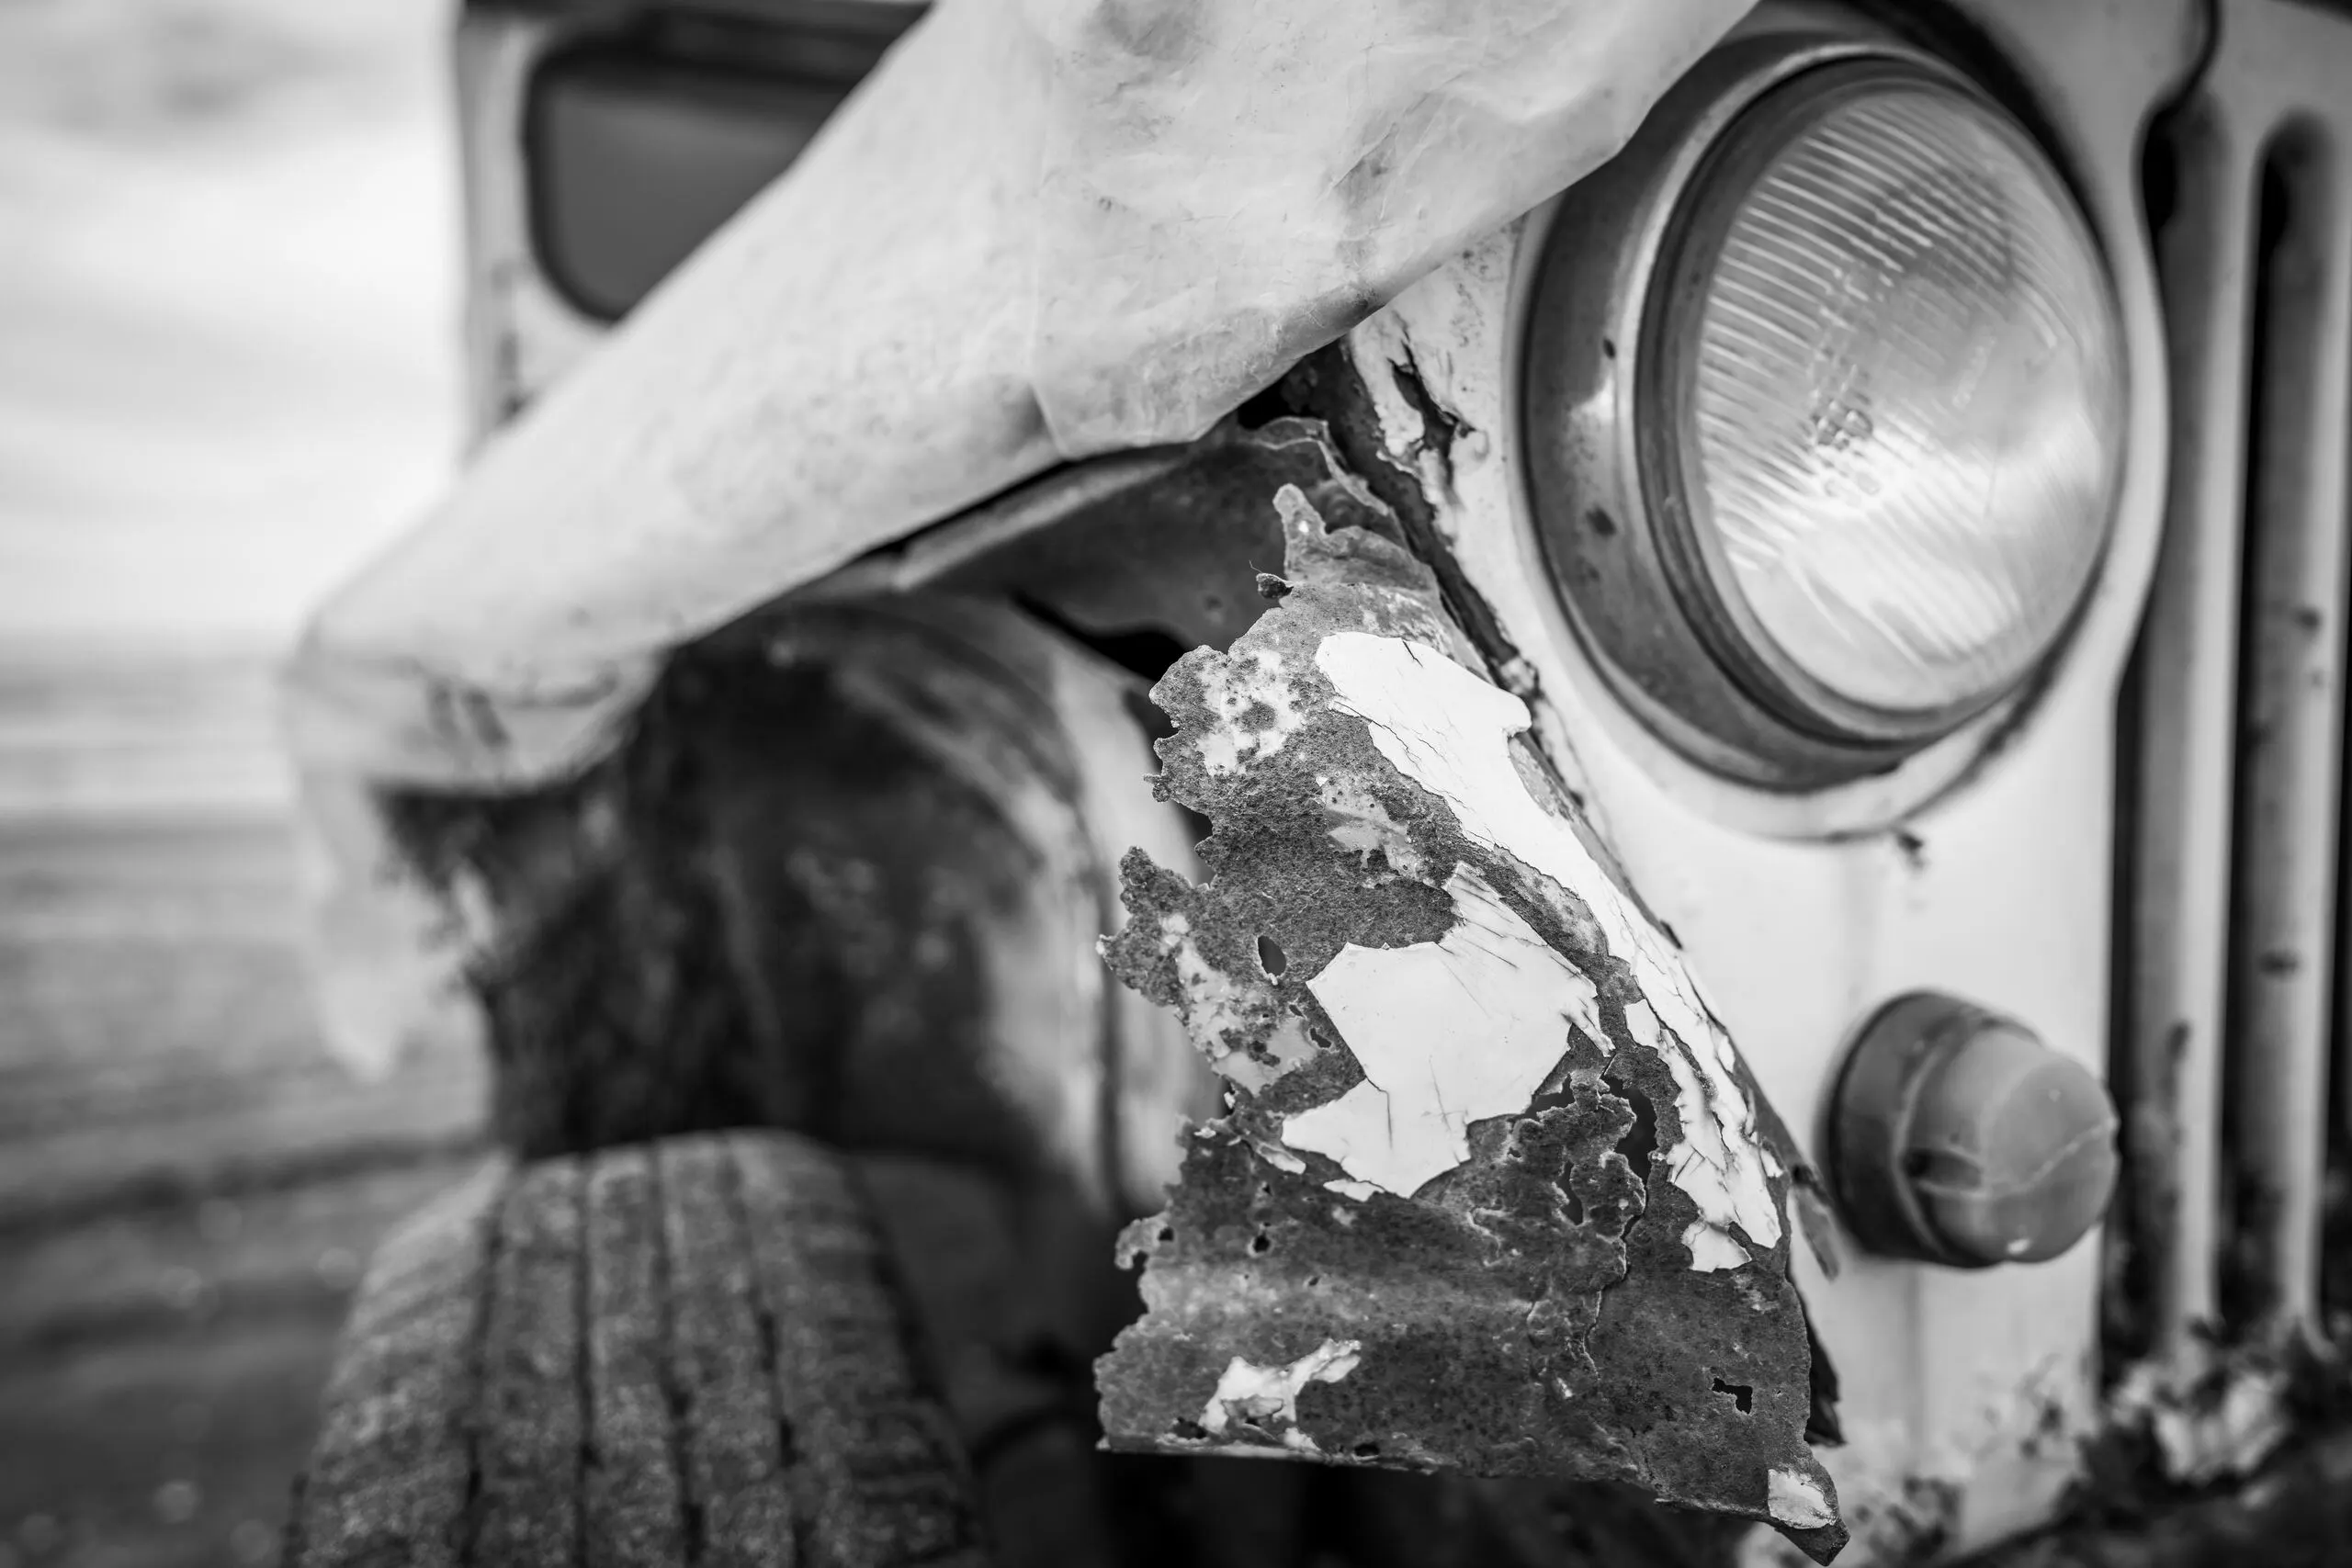 Close-up view of a dilapidated junk car with a visible headlight.